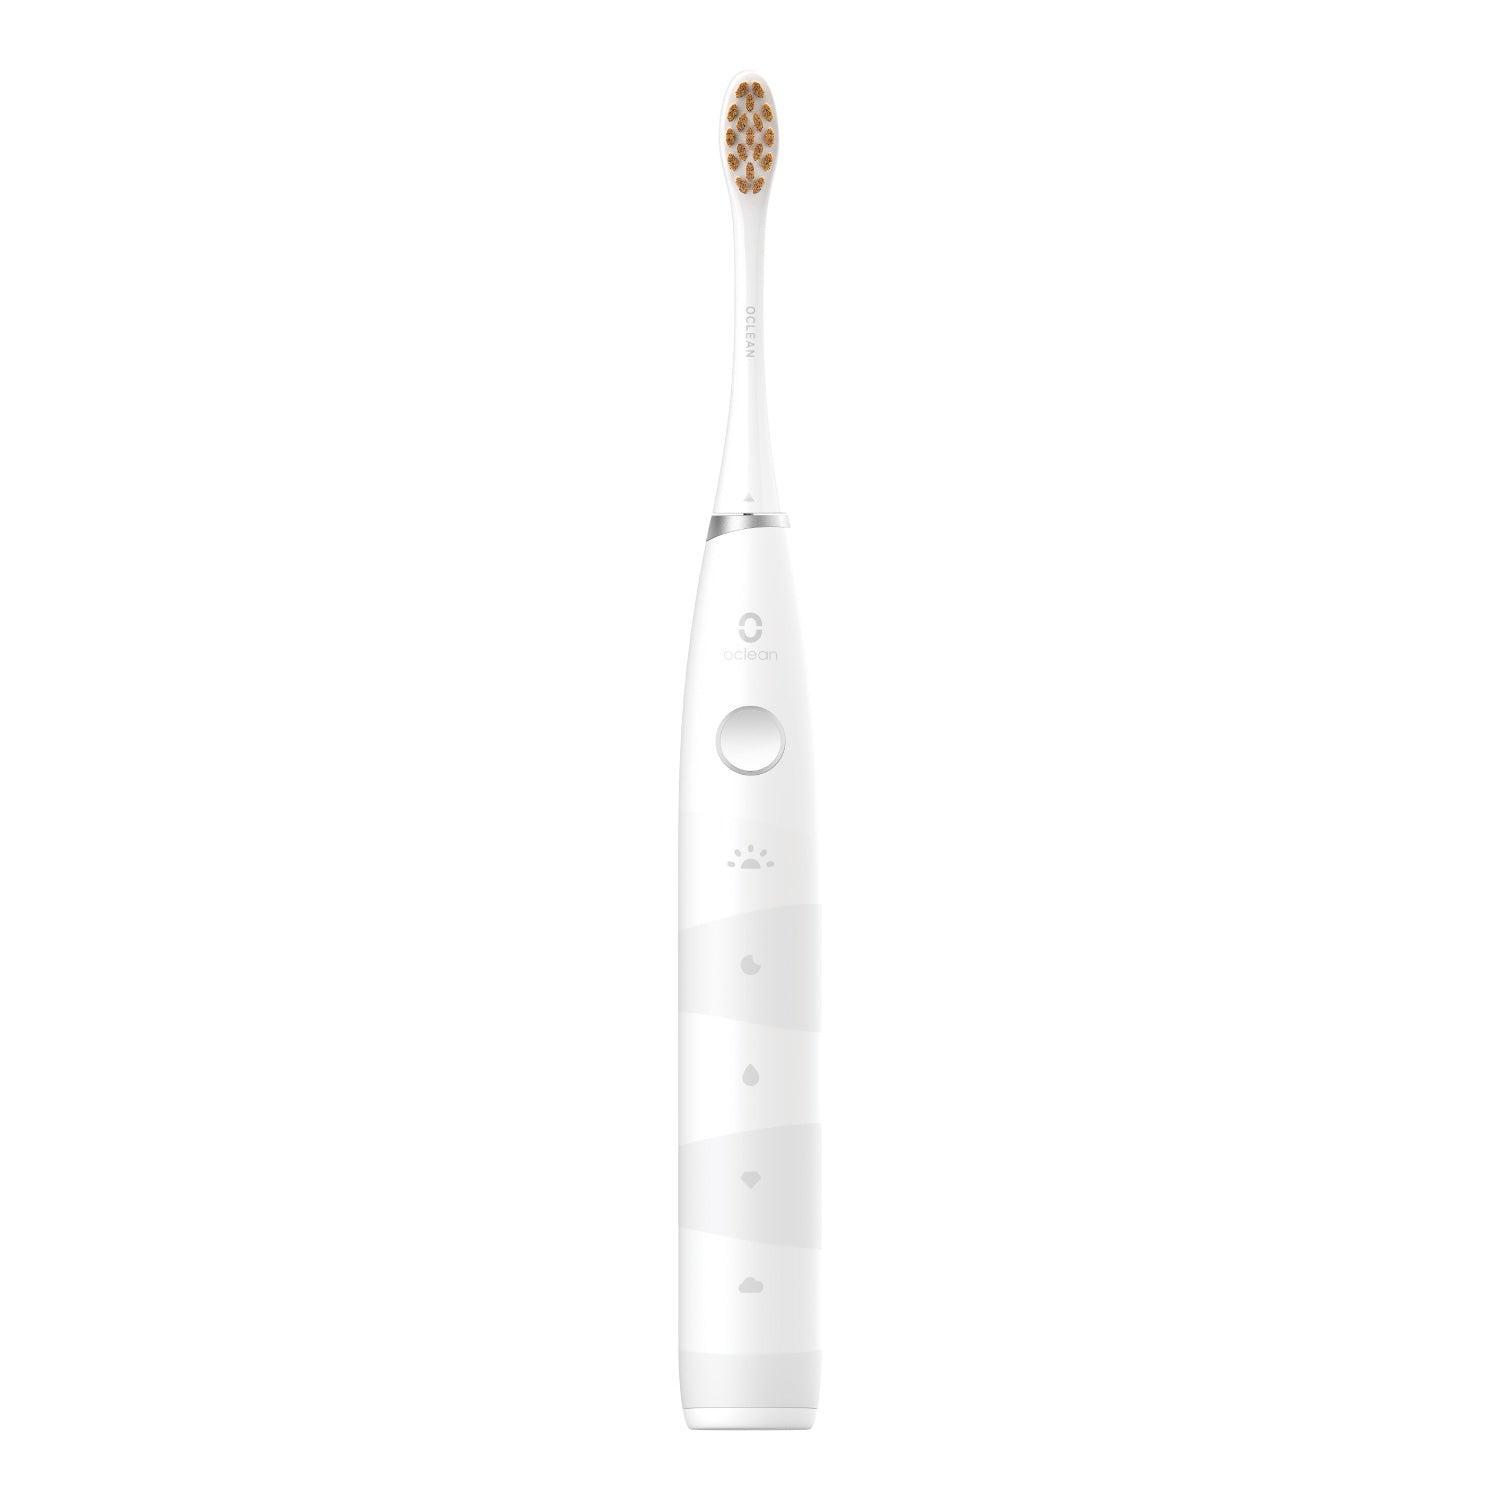 Oclean Flow Sonic Electric Toothbrush-Toothbrushes-Oclean Global Store